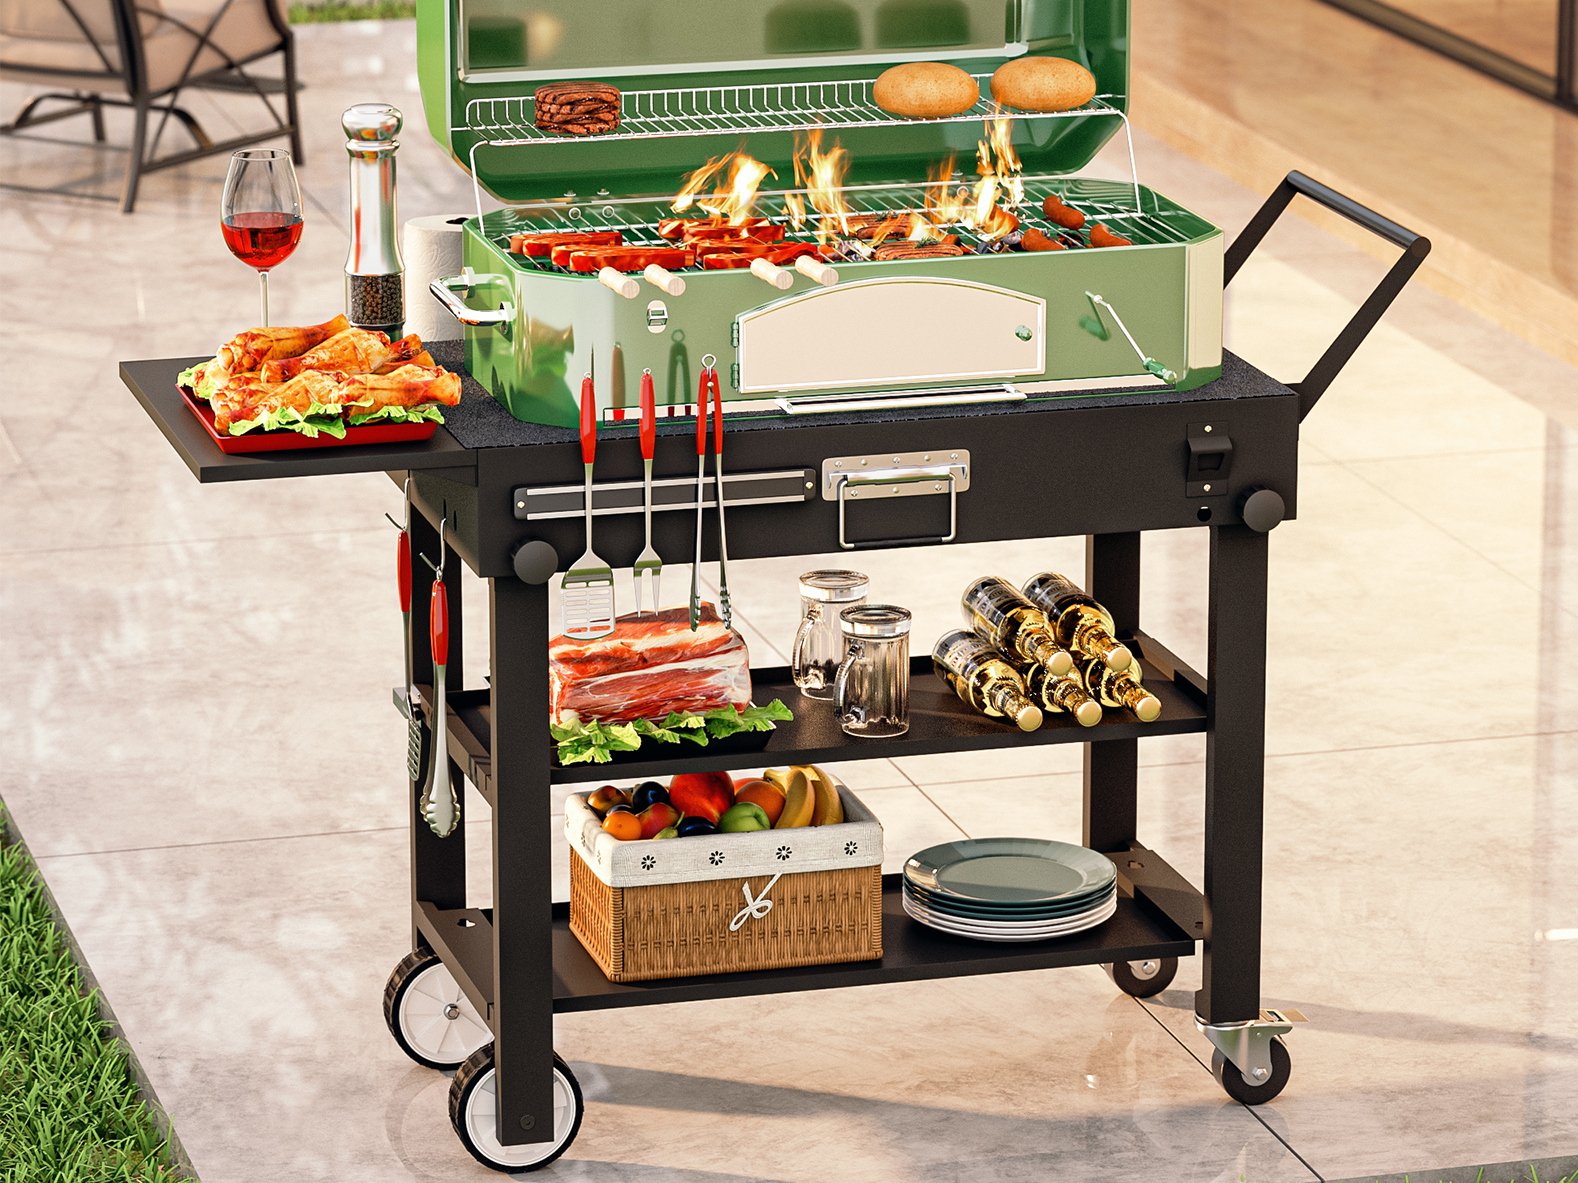 The WASAGUN Folding Portable Grill Table Is the Ultimate Outdoor BBQ Companion